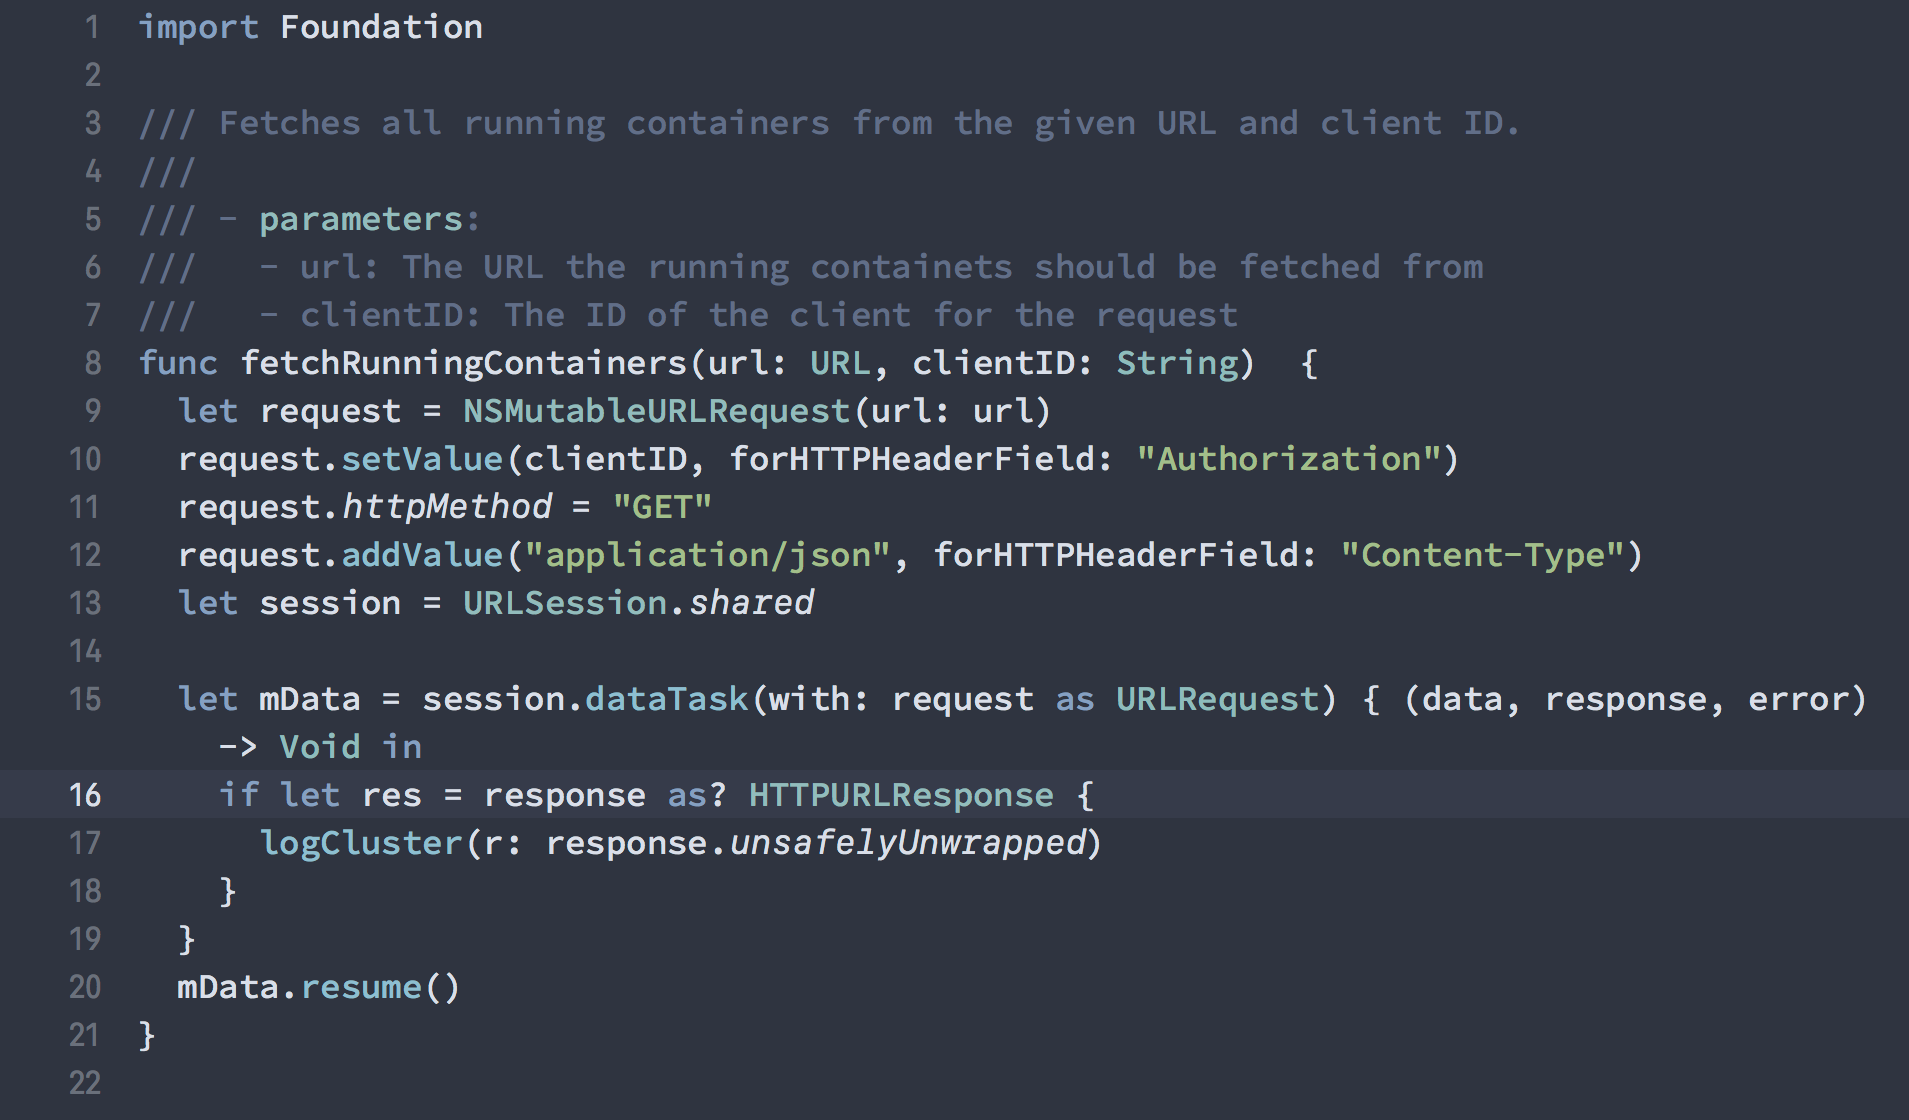 Screenshot showing the syntax highlighting in the Xcode source code editor